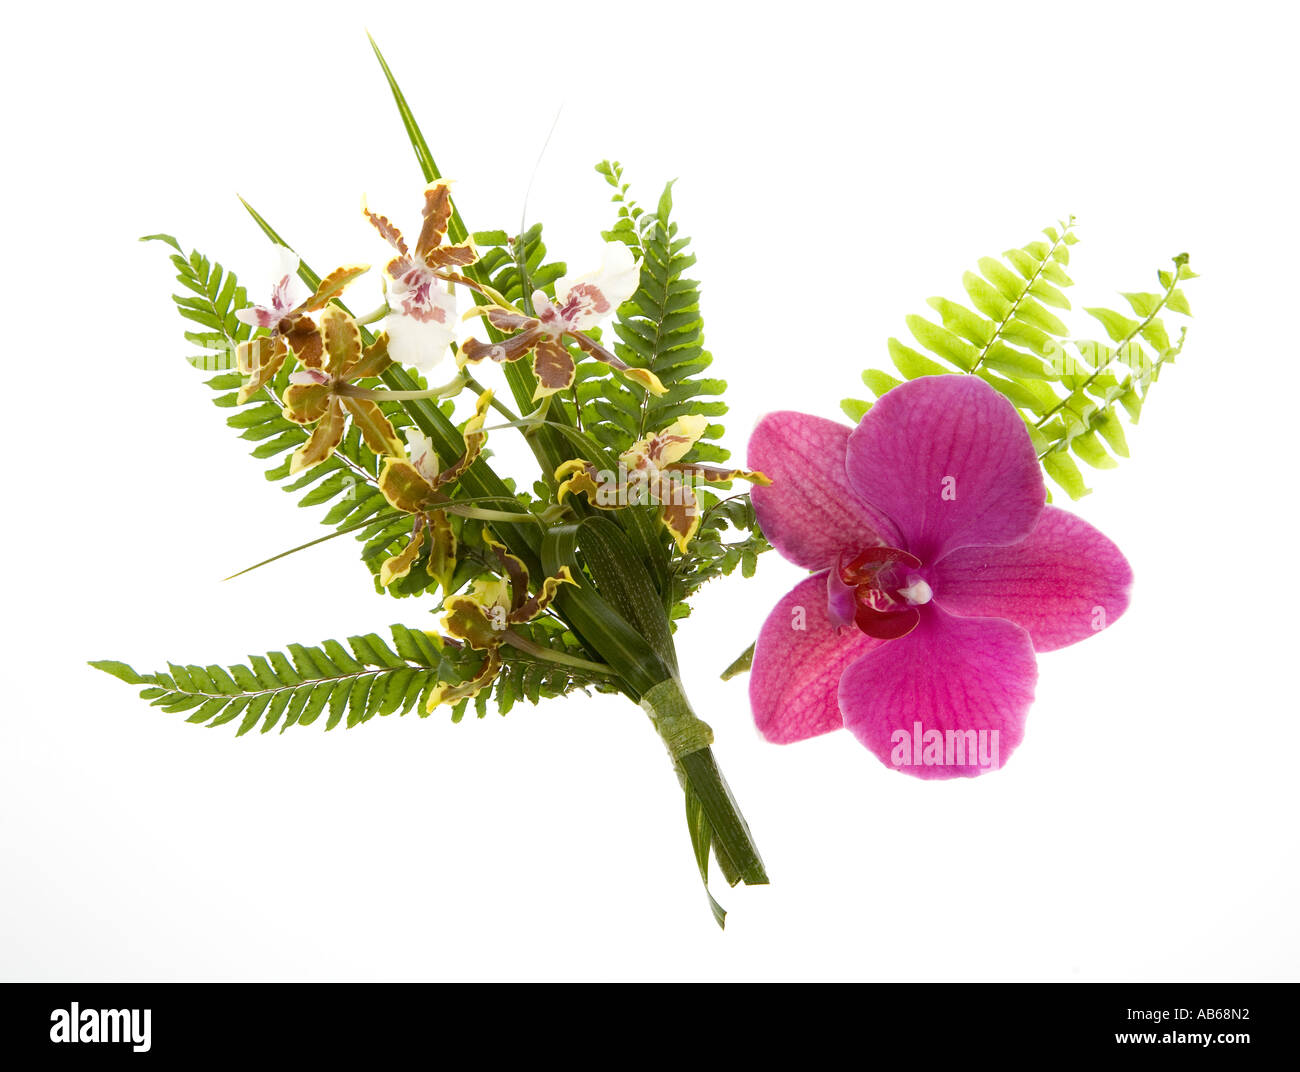 Orchids made into corsage and buttonhole presentations with fern backgrounds for wedding guests Wales UK Stock Photo